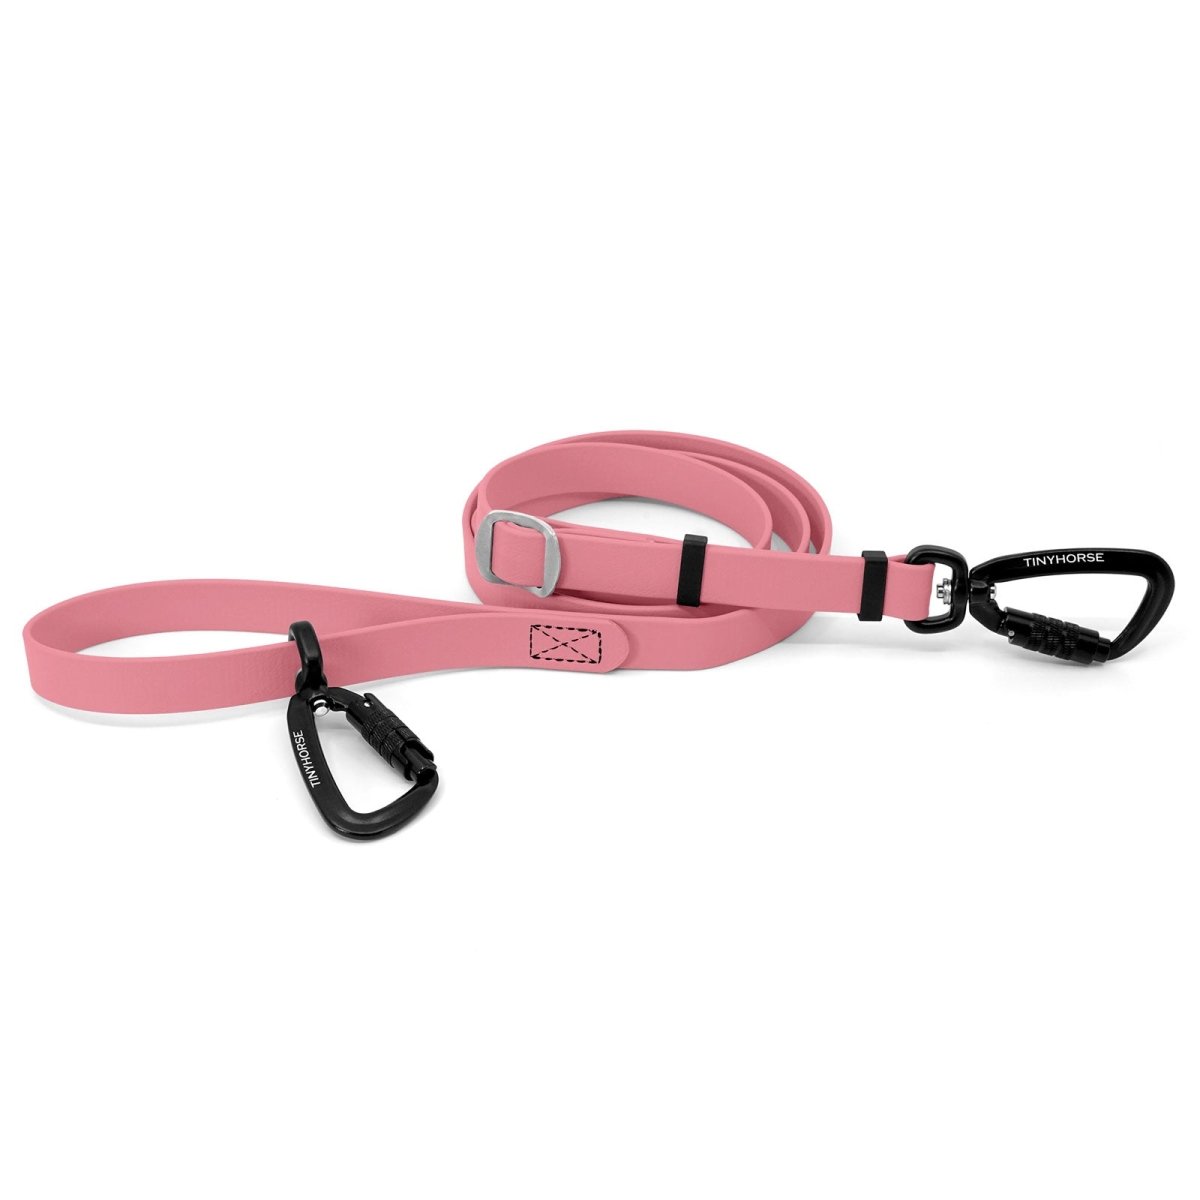 An adjustable baby pink-coloured Lead-All Pro Extra made of BioThane with 2 auto-locking carabiners